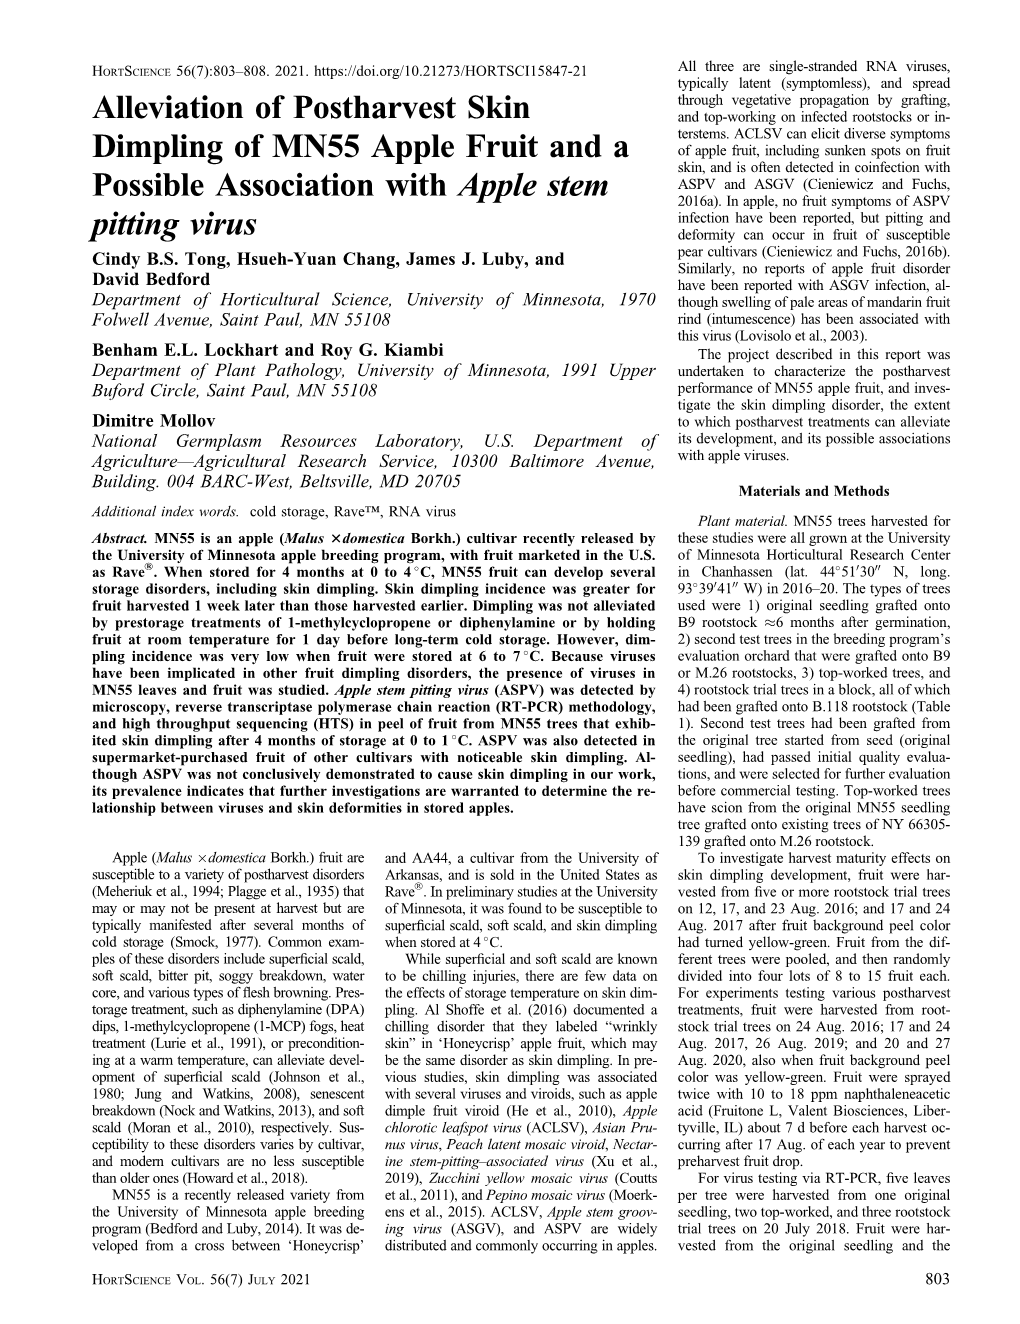 Alleviation of Postharvest Skin Dimpling of MN55 Apple Fruit and A